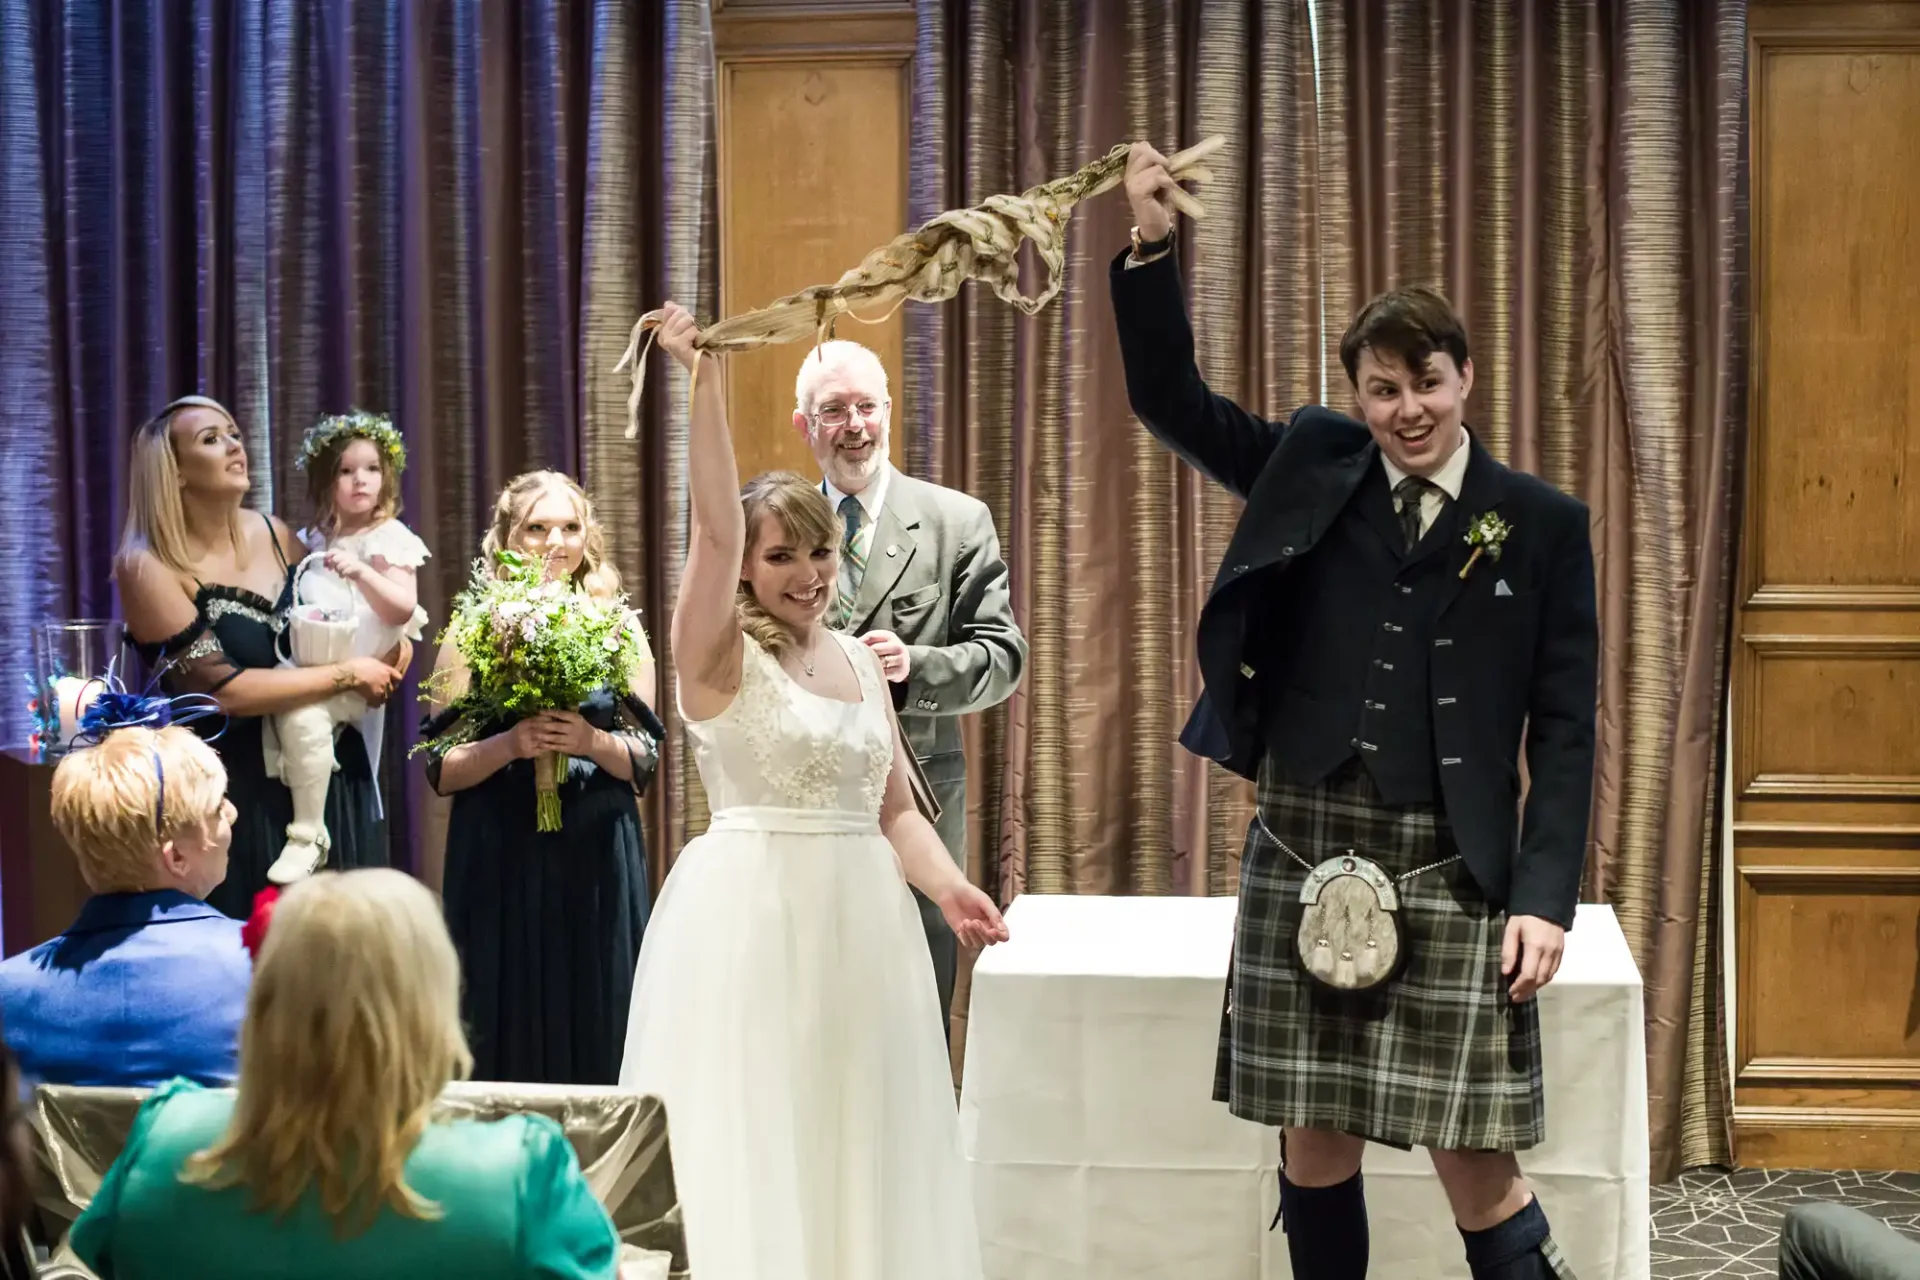 A bride and groom joyfully cut their wedding cake as guests watch, with the groom wearing a traditional kilt and the bride in a white dress.